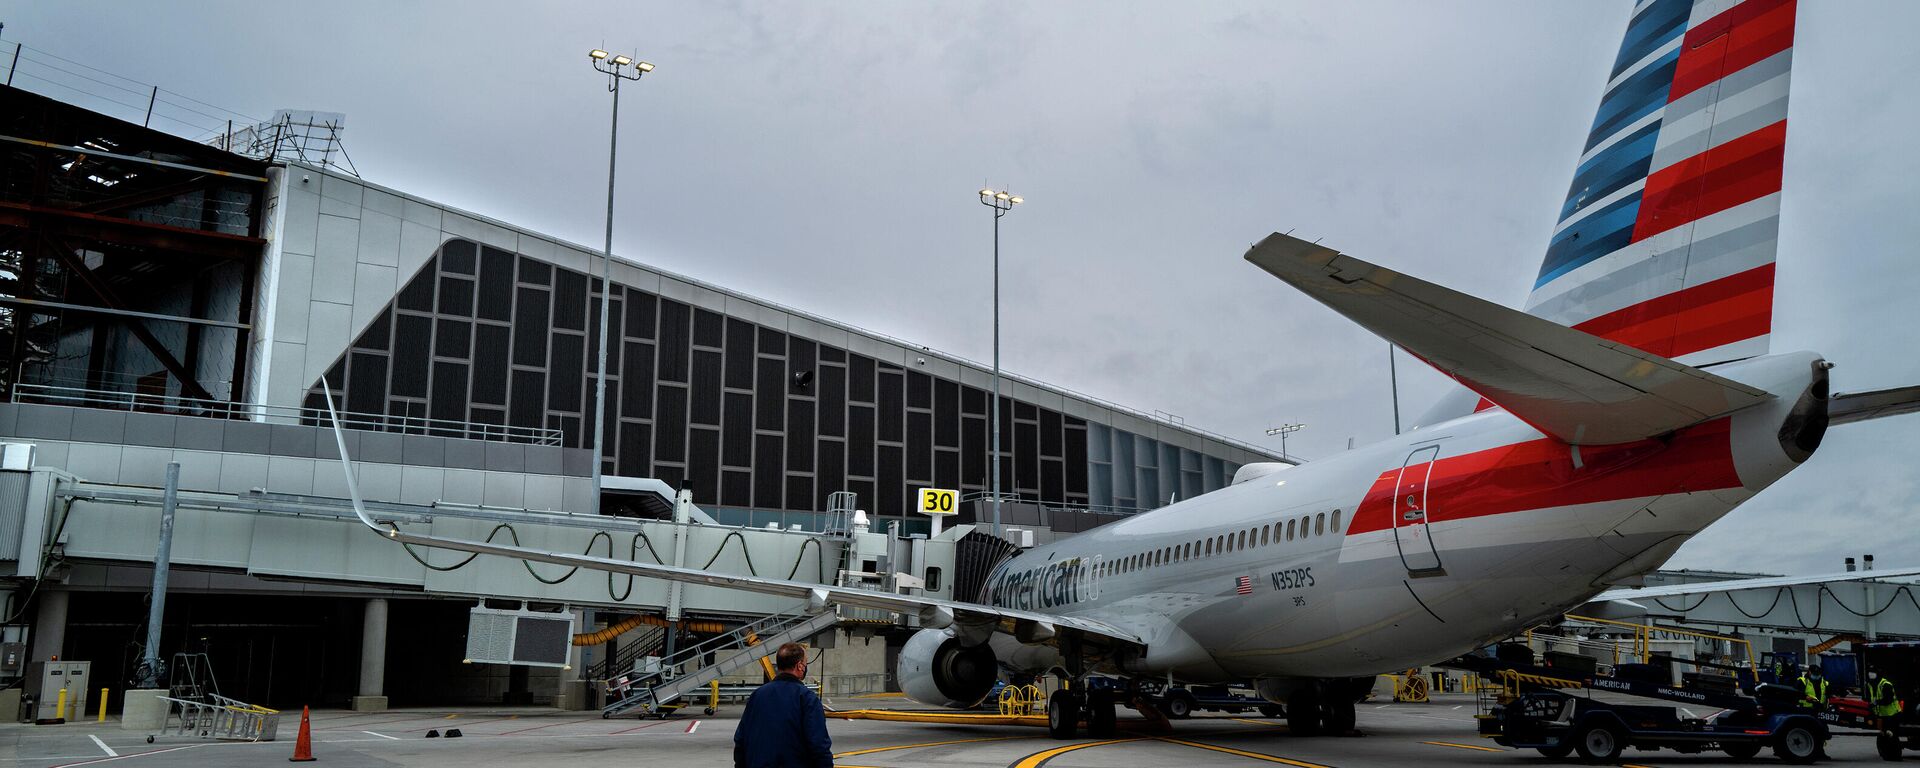 Christopher Rhoads, Manager of Airport Operations/Aviation at LaGuardia Airport in New York, stands near an American Airlines passenger jet being served at gate 30, Wednesday, March 24, 2021, near newer construction at the airport, part of a multi-year, multi-billion dollar project that will modernize almost the entirety of the airport's departure and arrival terminals. - Sputnik International, 1920, 09.10.2021